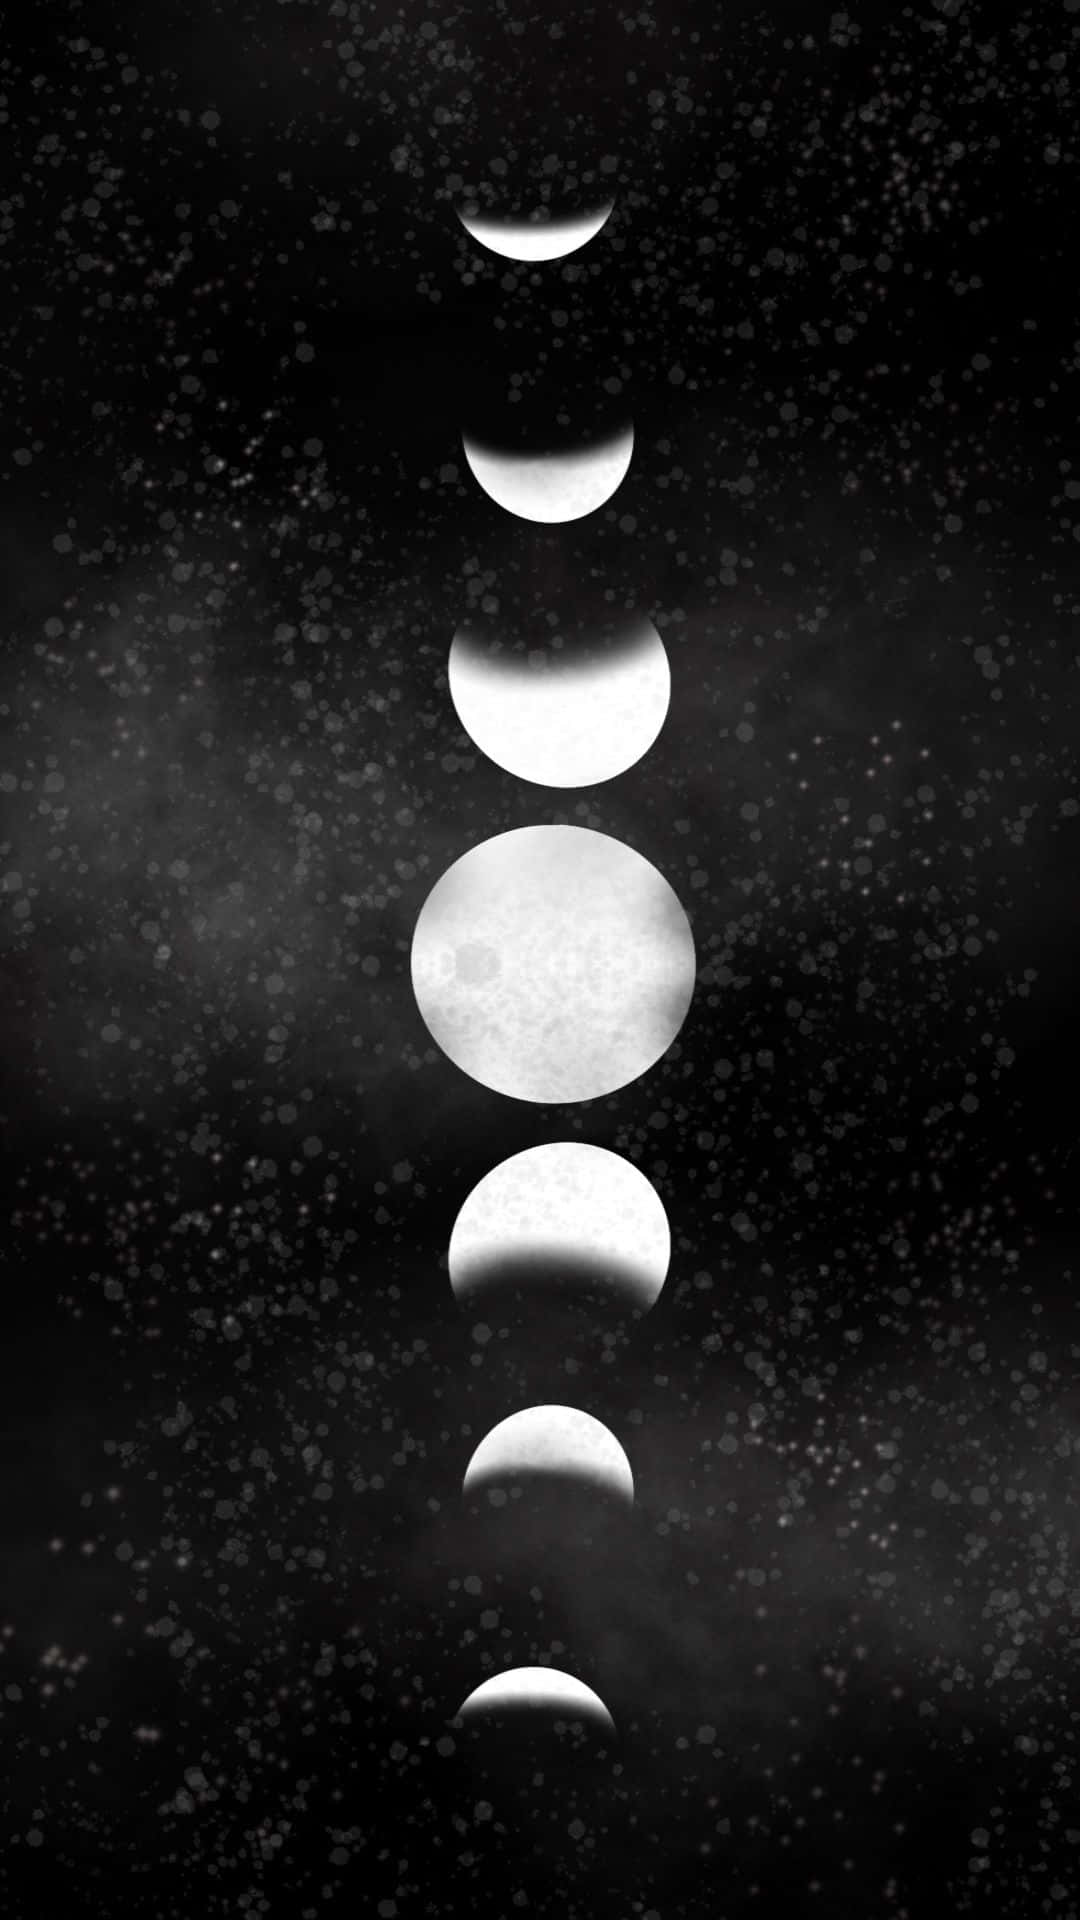 "The Moon on your Iphone" Wallpaper